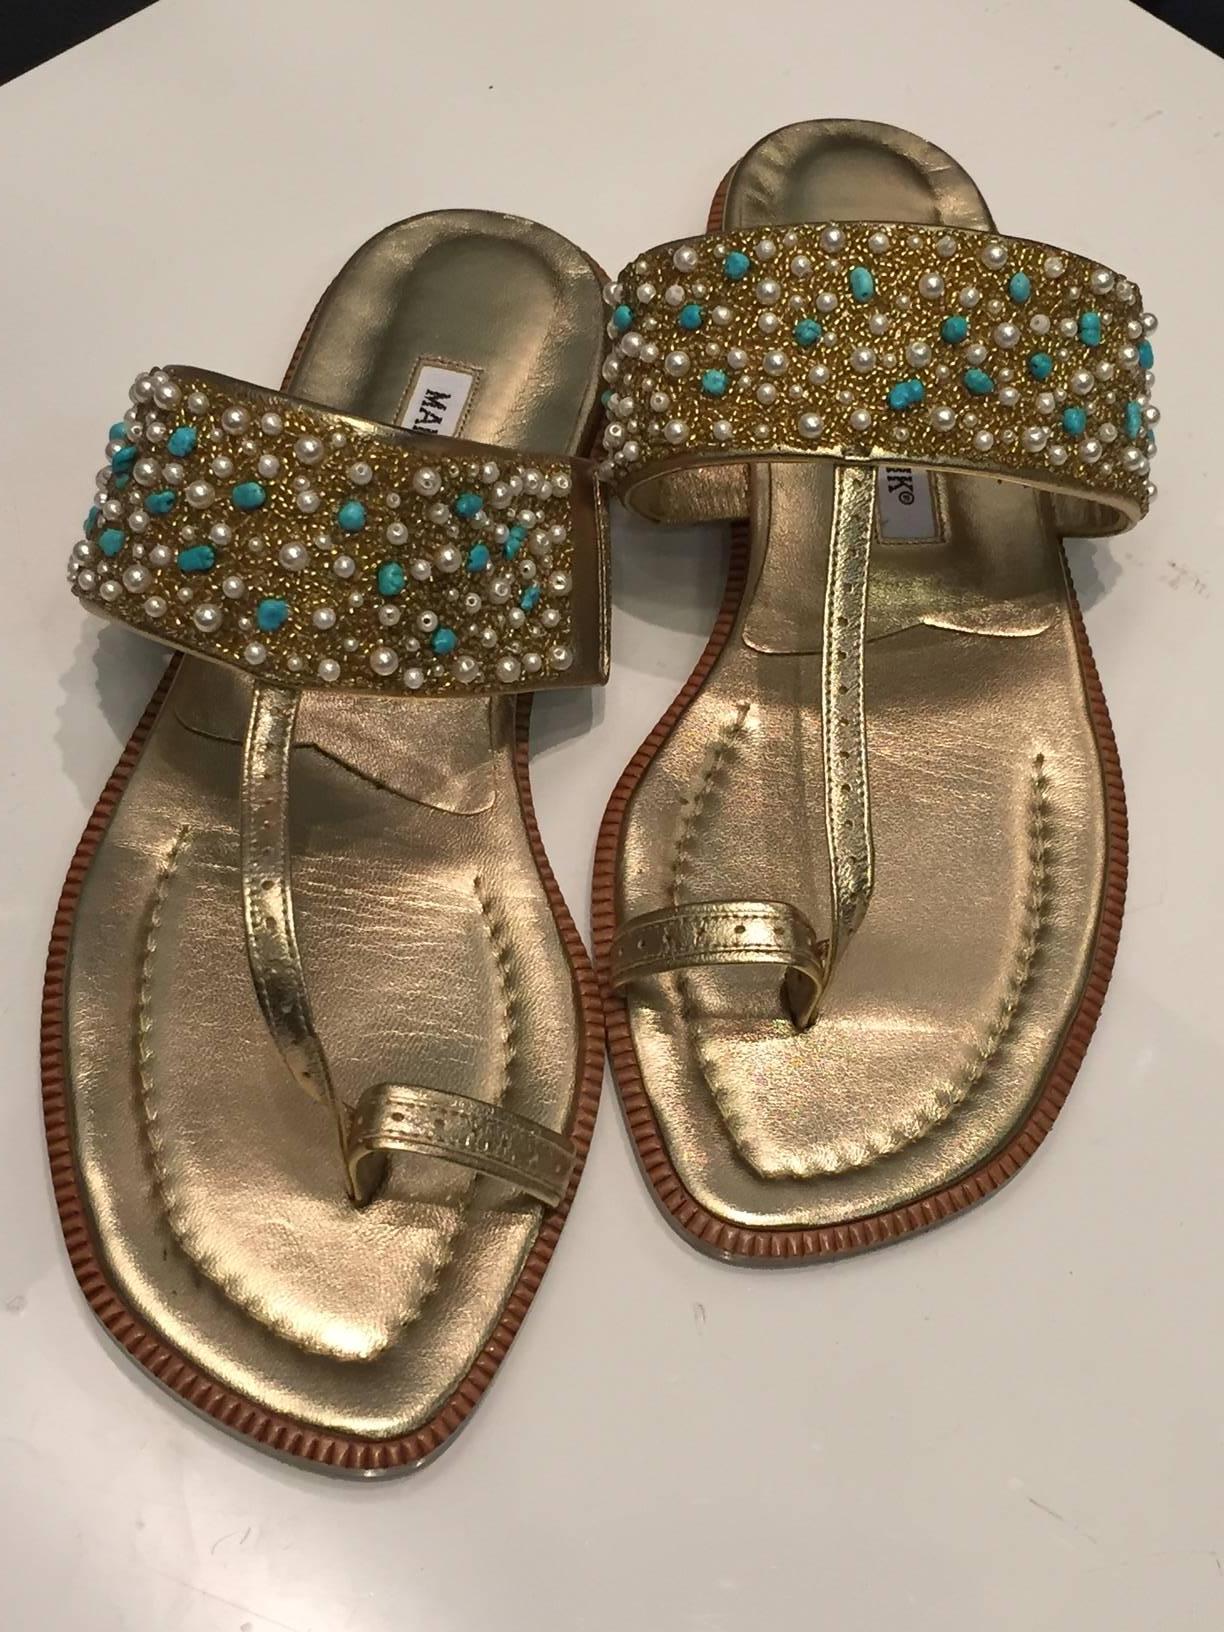 A classic Manolo Blahnik gold leather sandal with turquoise, pearl and gold beaded band at vamp and loop toe. 

Size 37